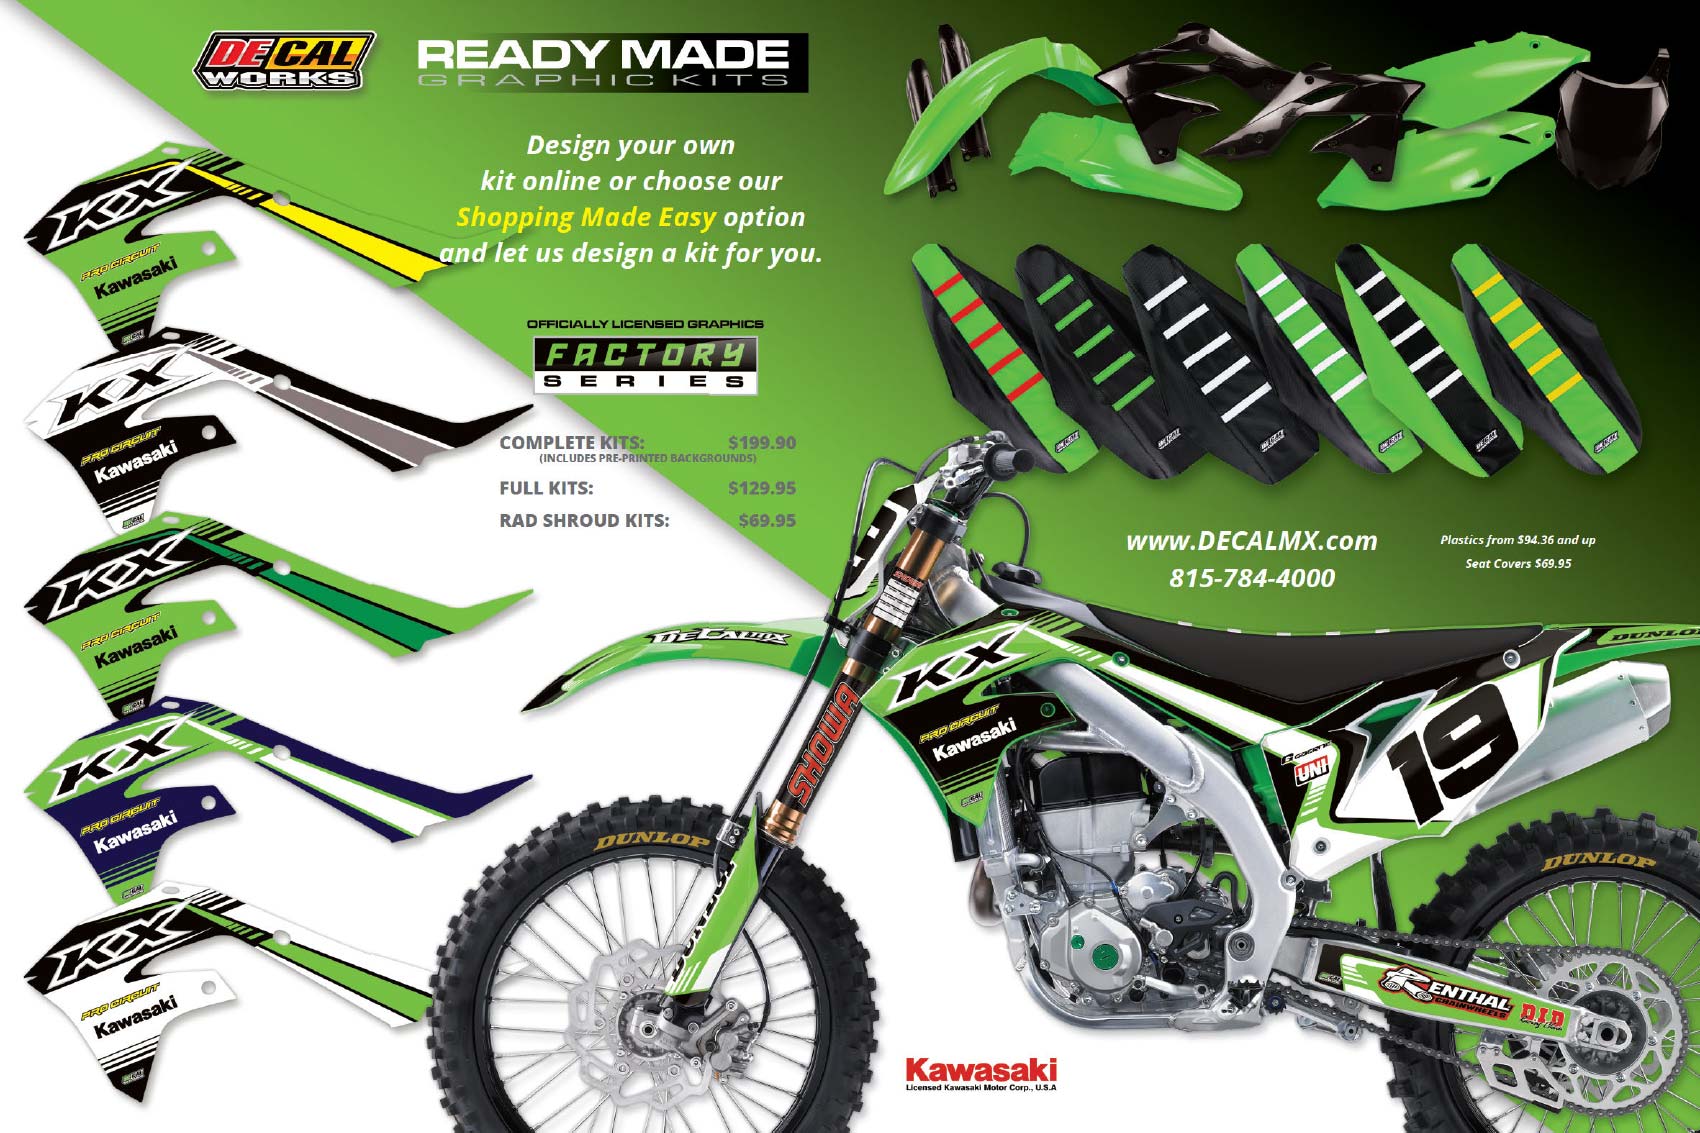 Racer X May 2019 - Decal Works Advertisement